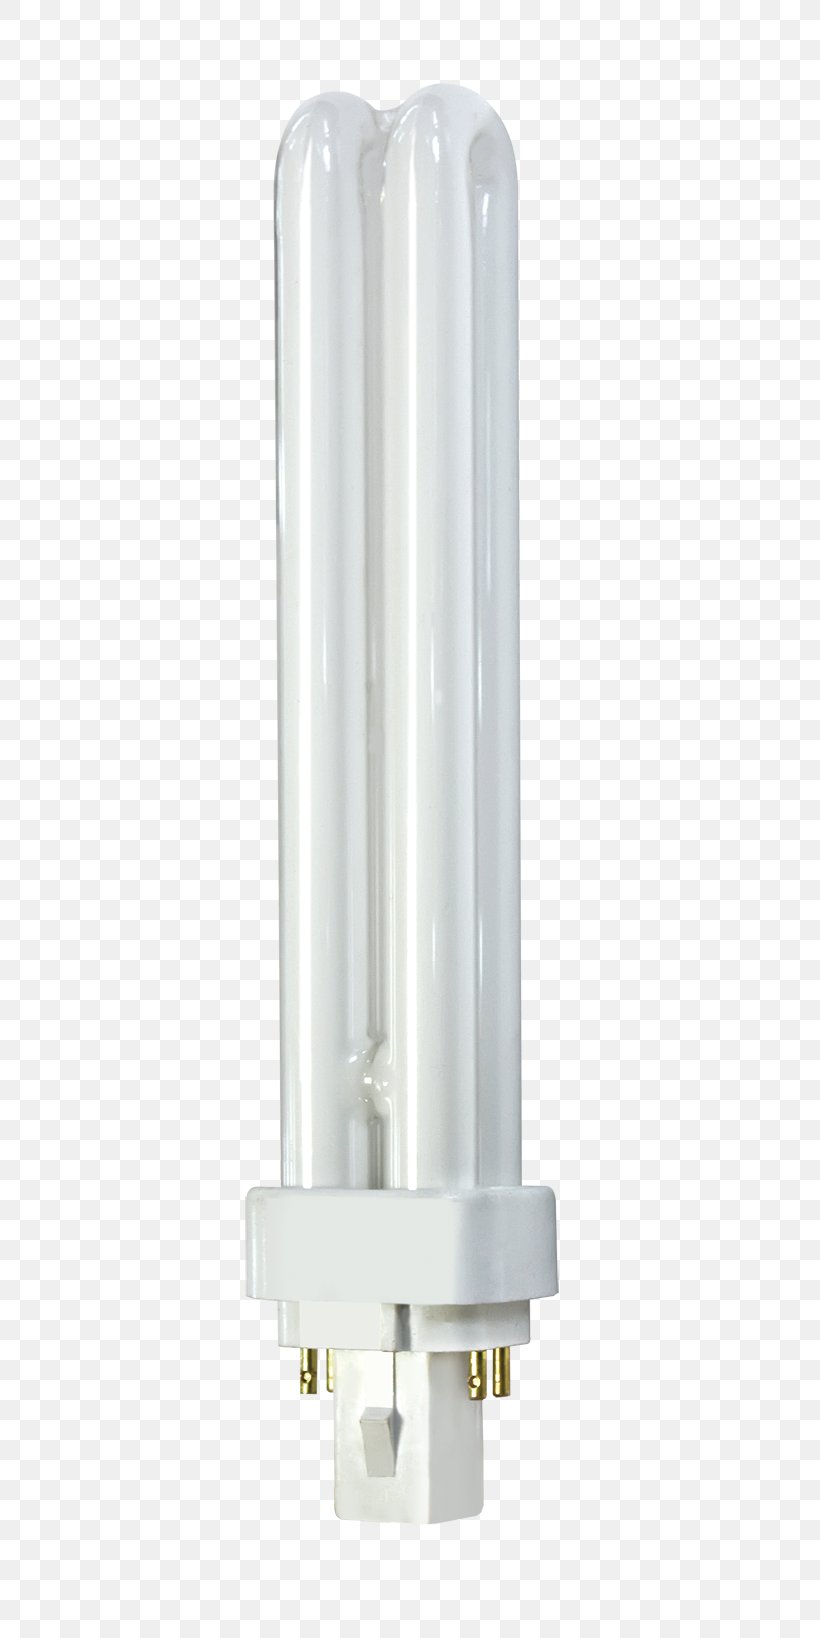 Compact Fluorescent Lamp Lighting Edison Screw Electrical Ballast, PNG, 500x1638px, Compact Fluorescent Lamp, Christmas Lights, Christmas Tree, Edison Screw, Electrical Ballast Download Free